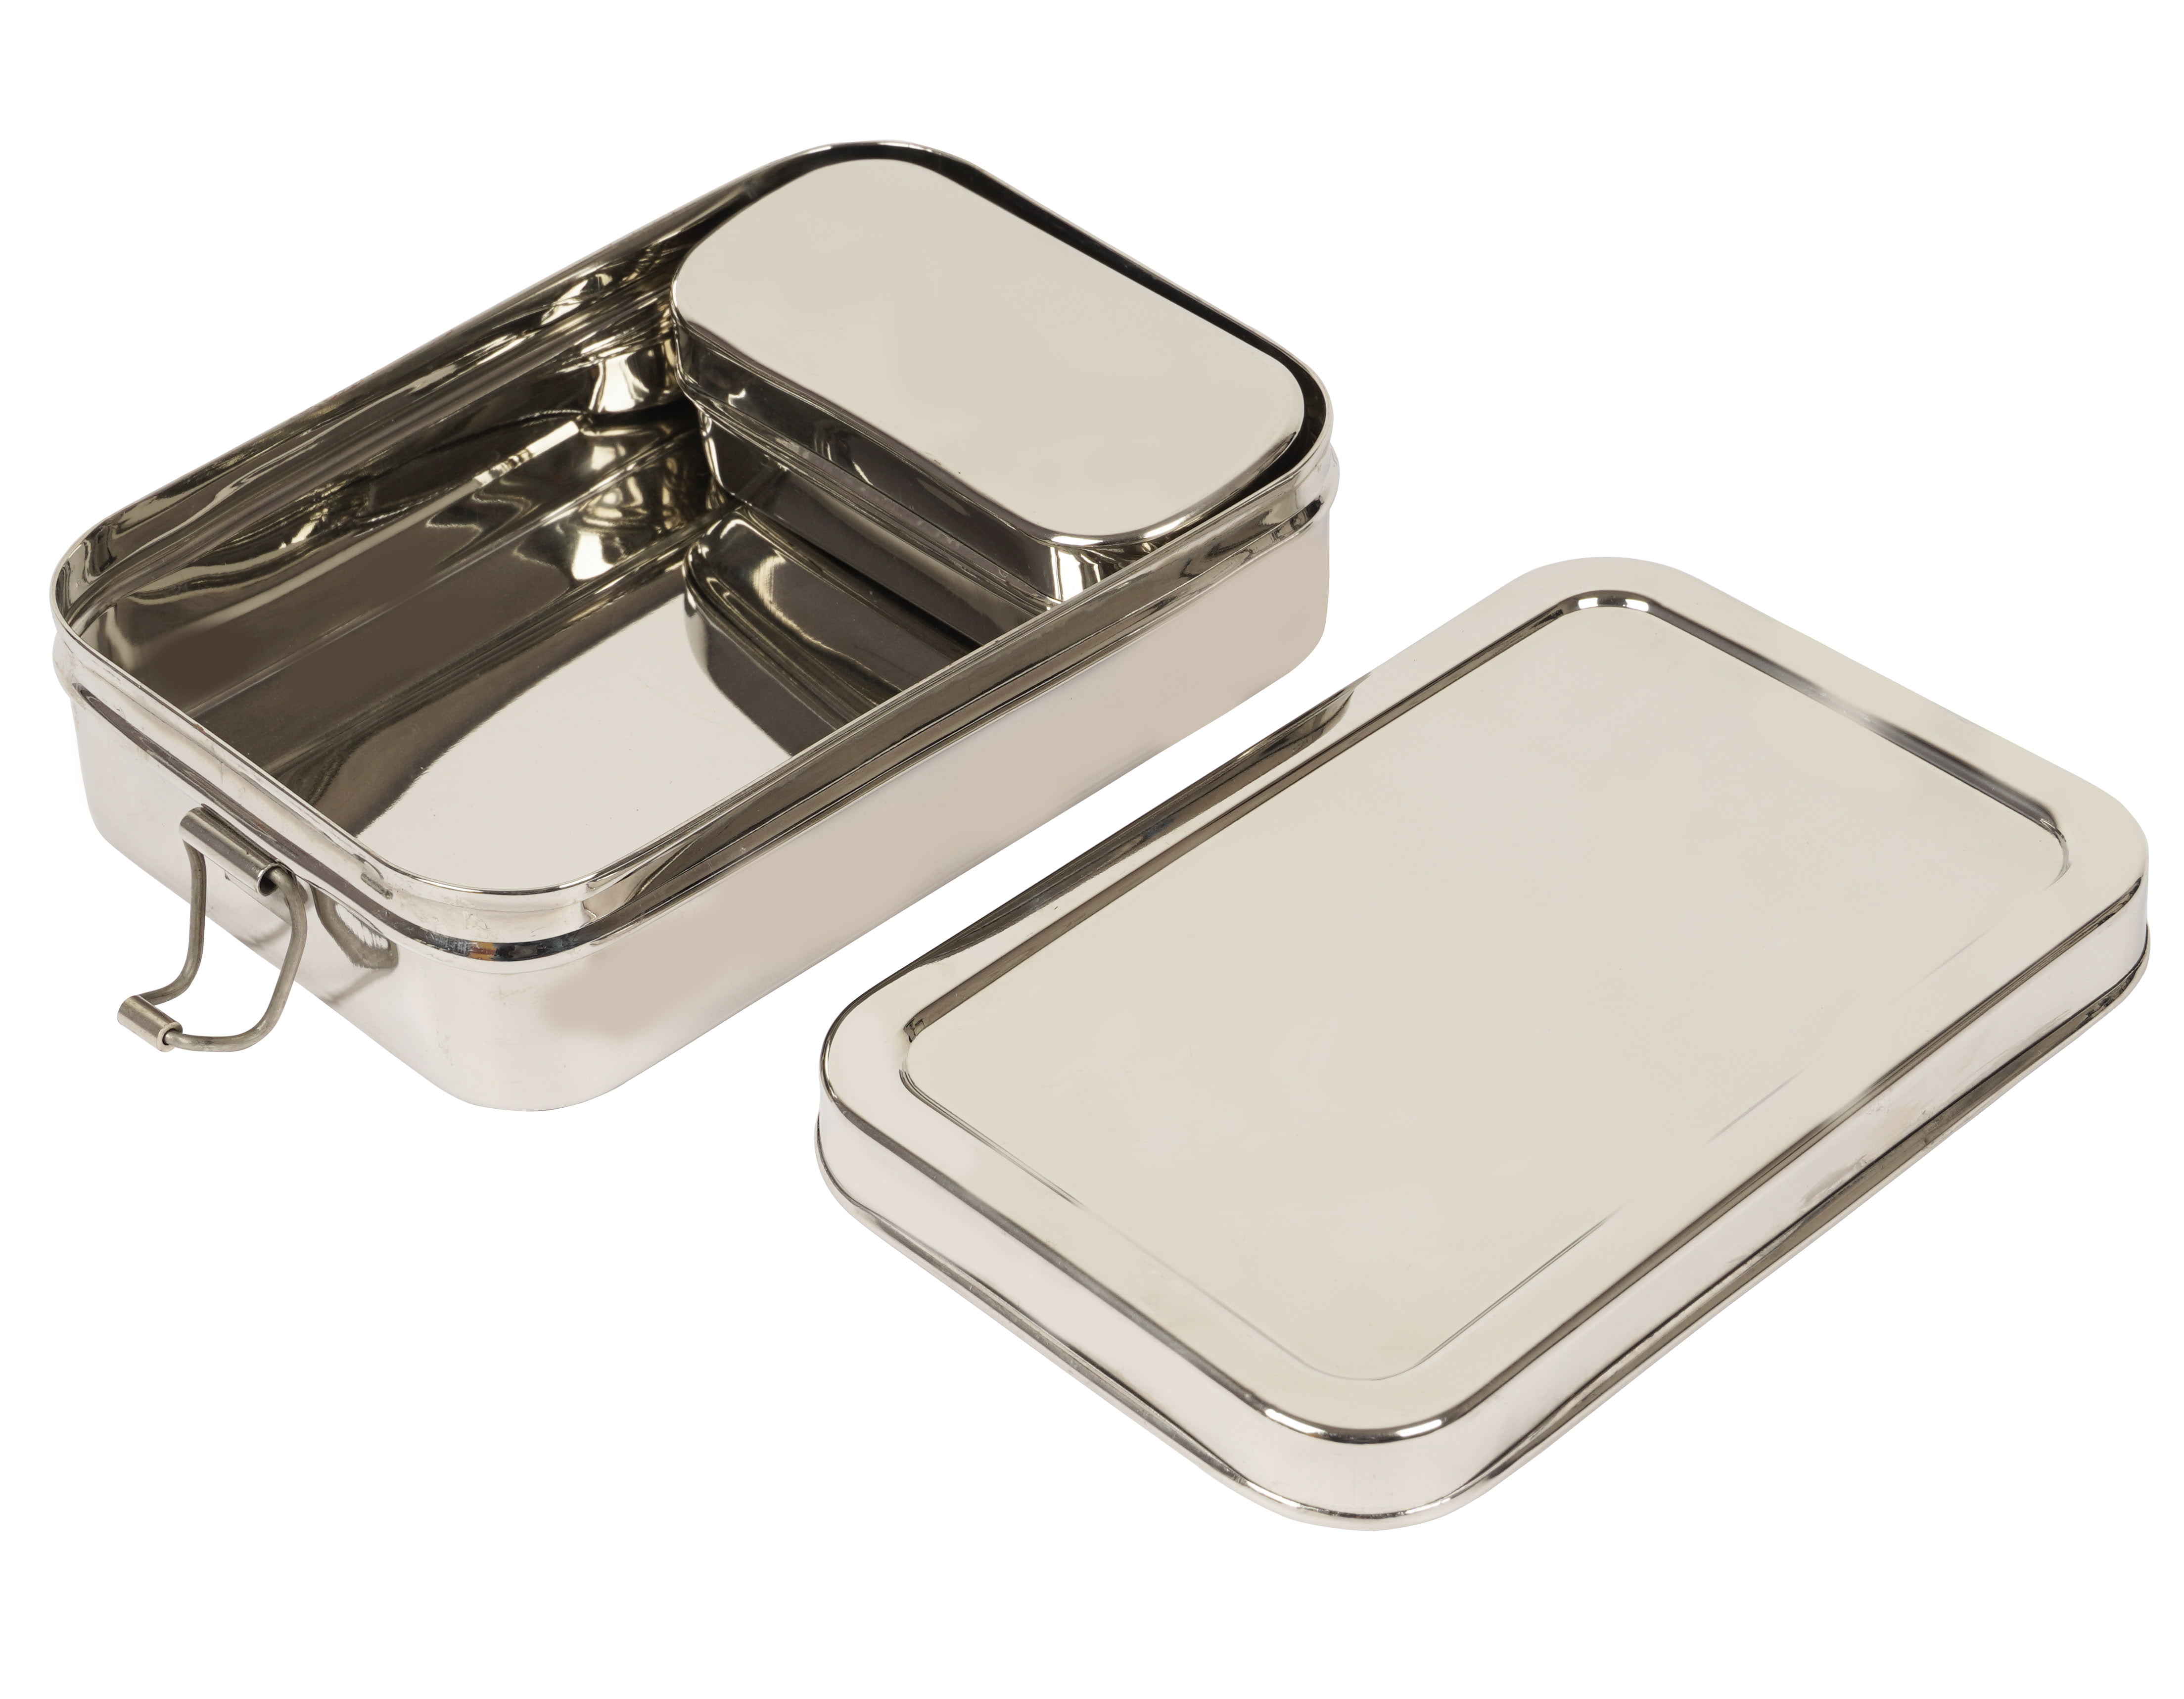 Lunch box – Buy stainless steel tiffin box with bag online